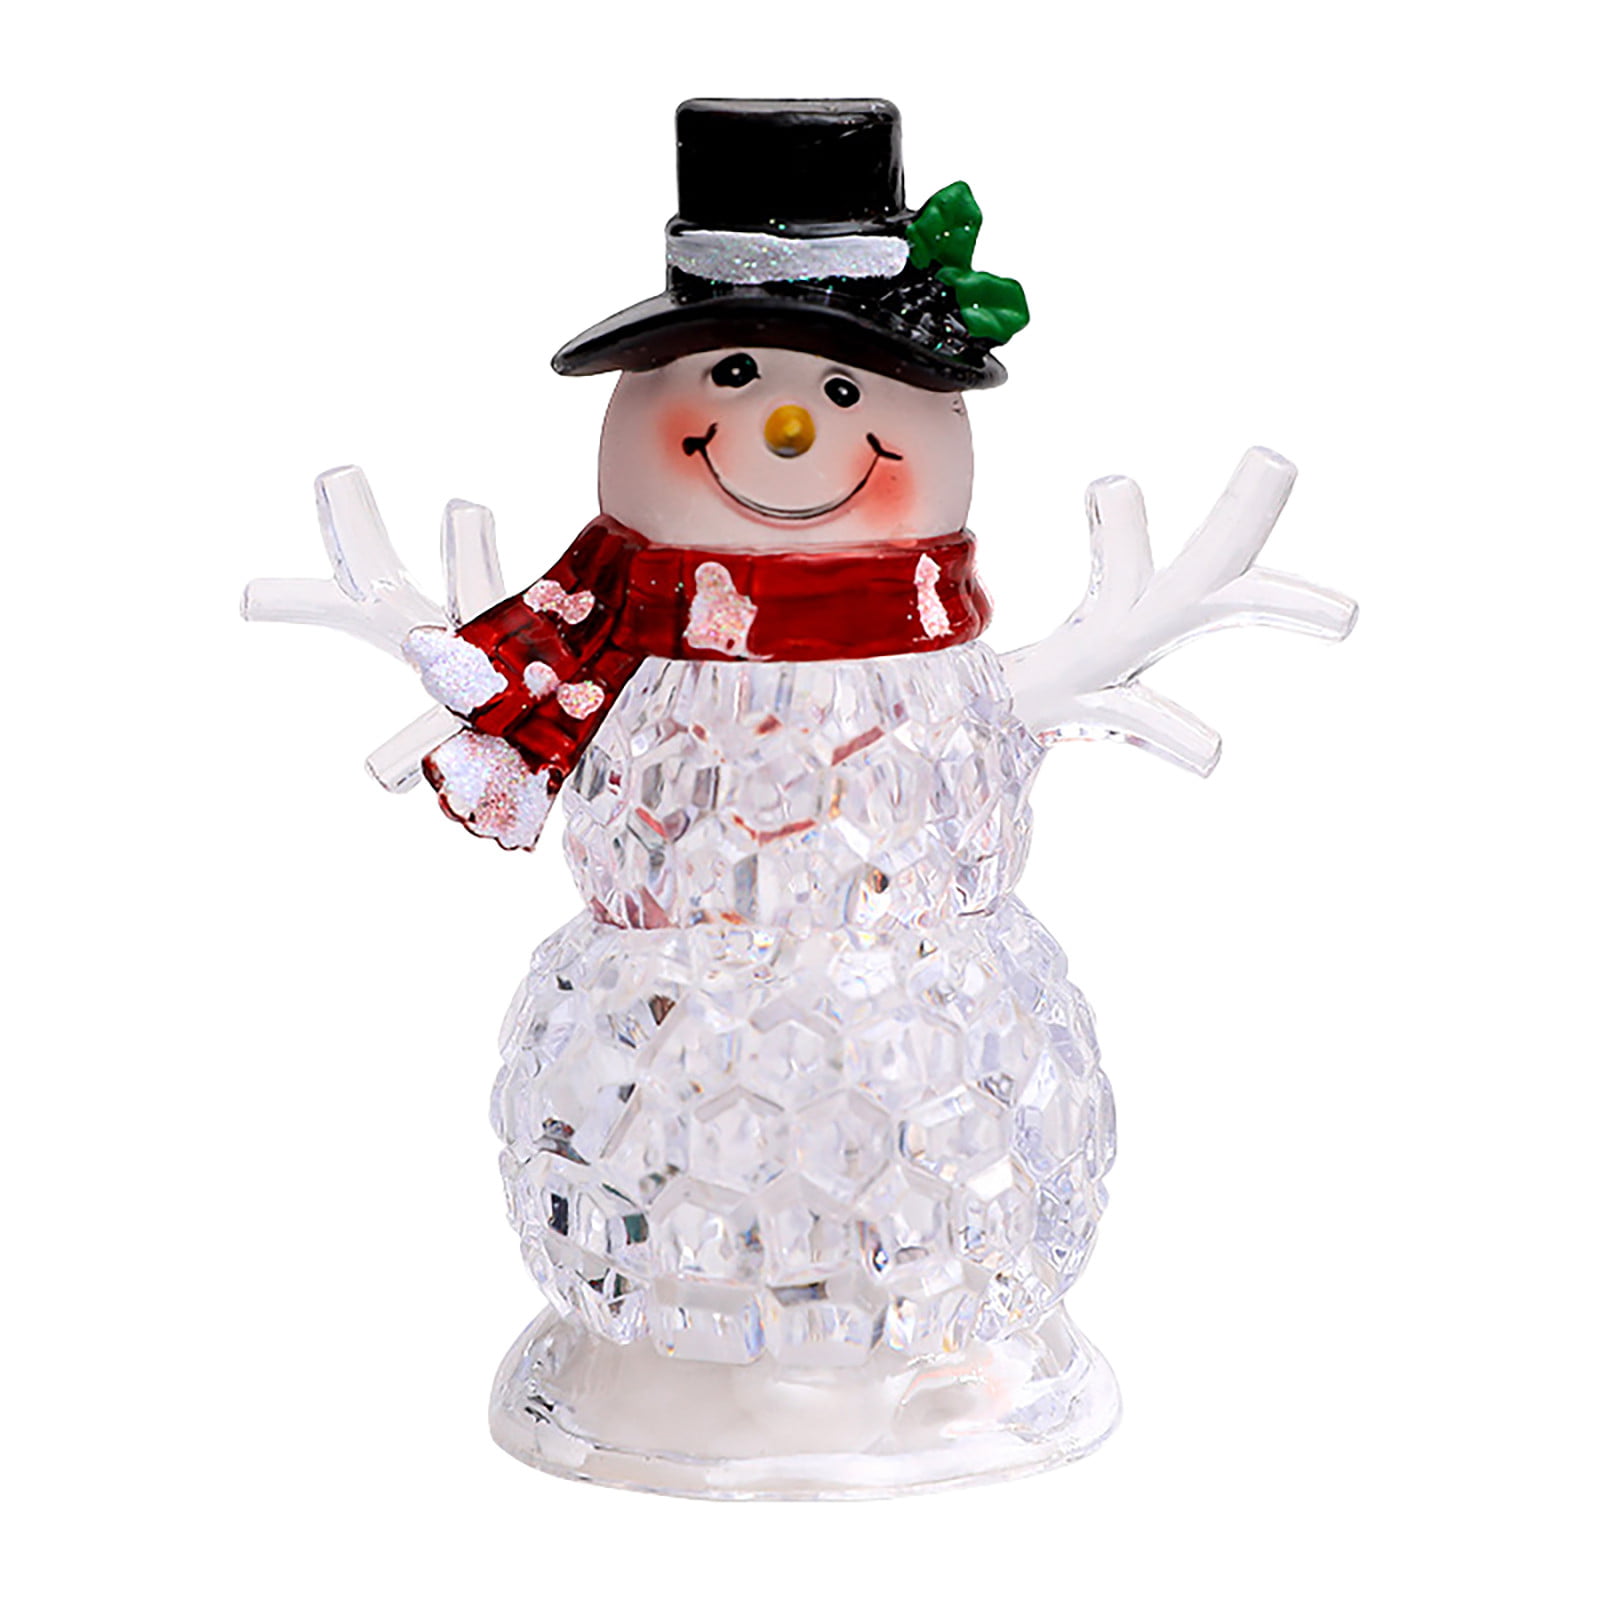 Snowman Christmas Porcelain Figurine Night Light with Gift Box NEW 